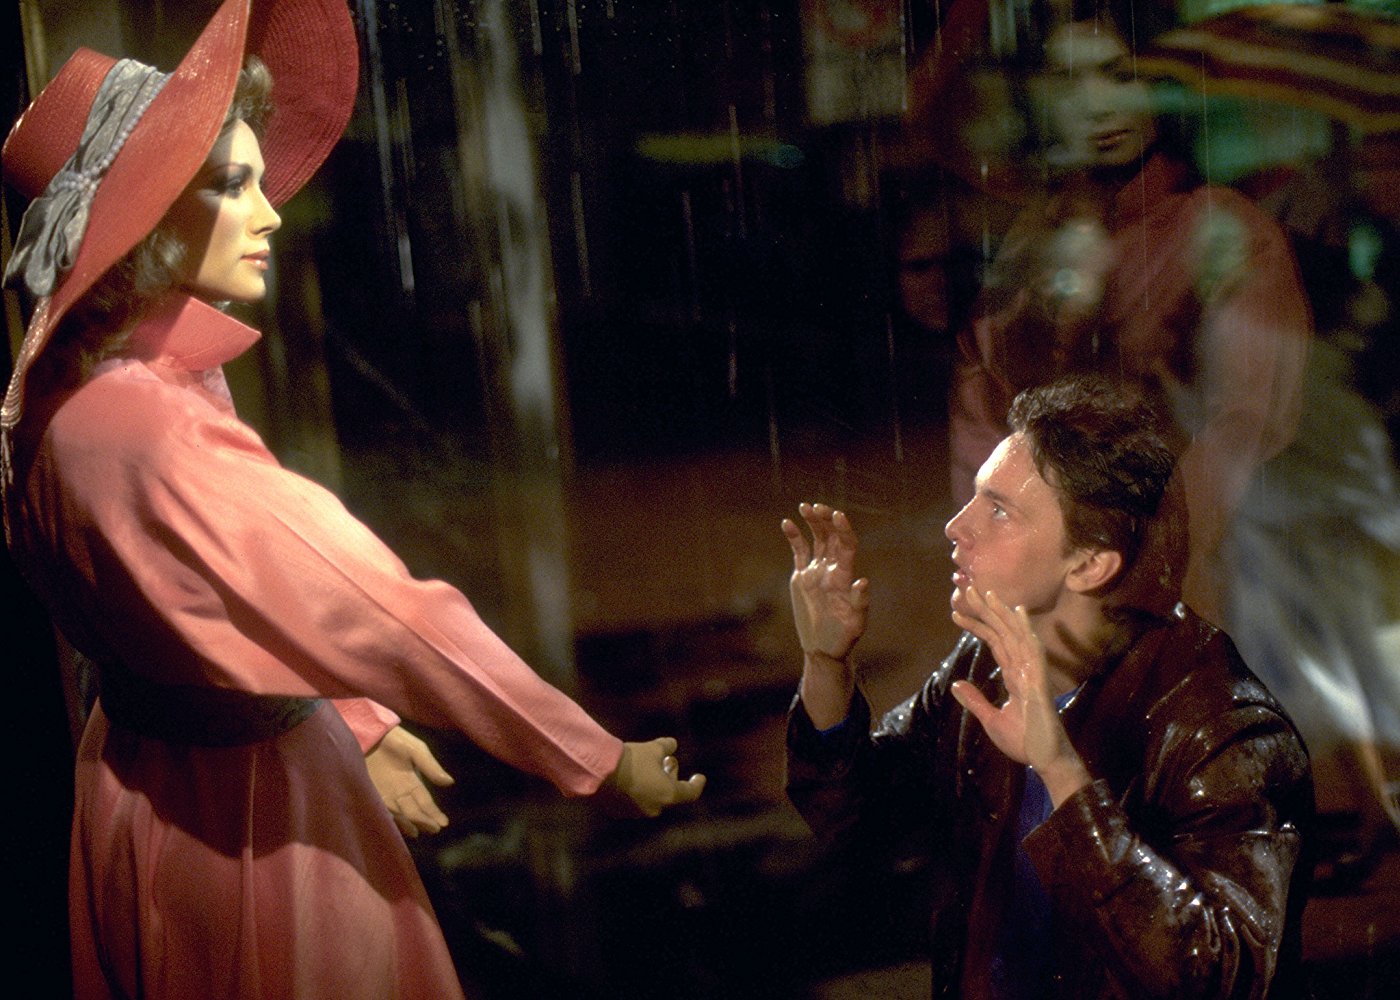 Andrew McCarthy looks upon the mannequin of his dreams in Mannequin (1987)